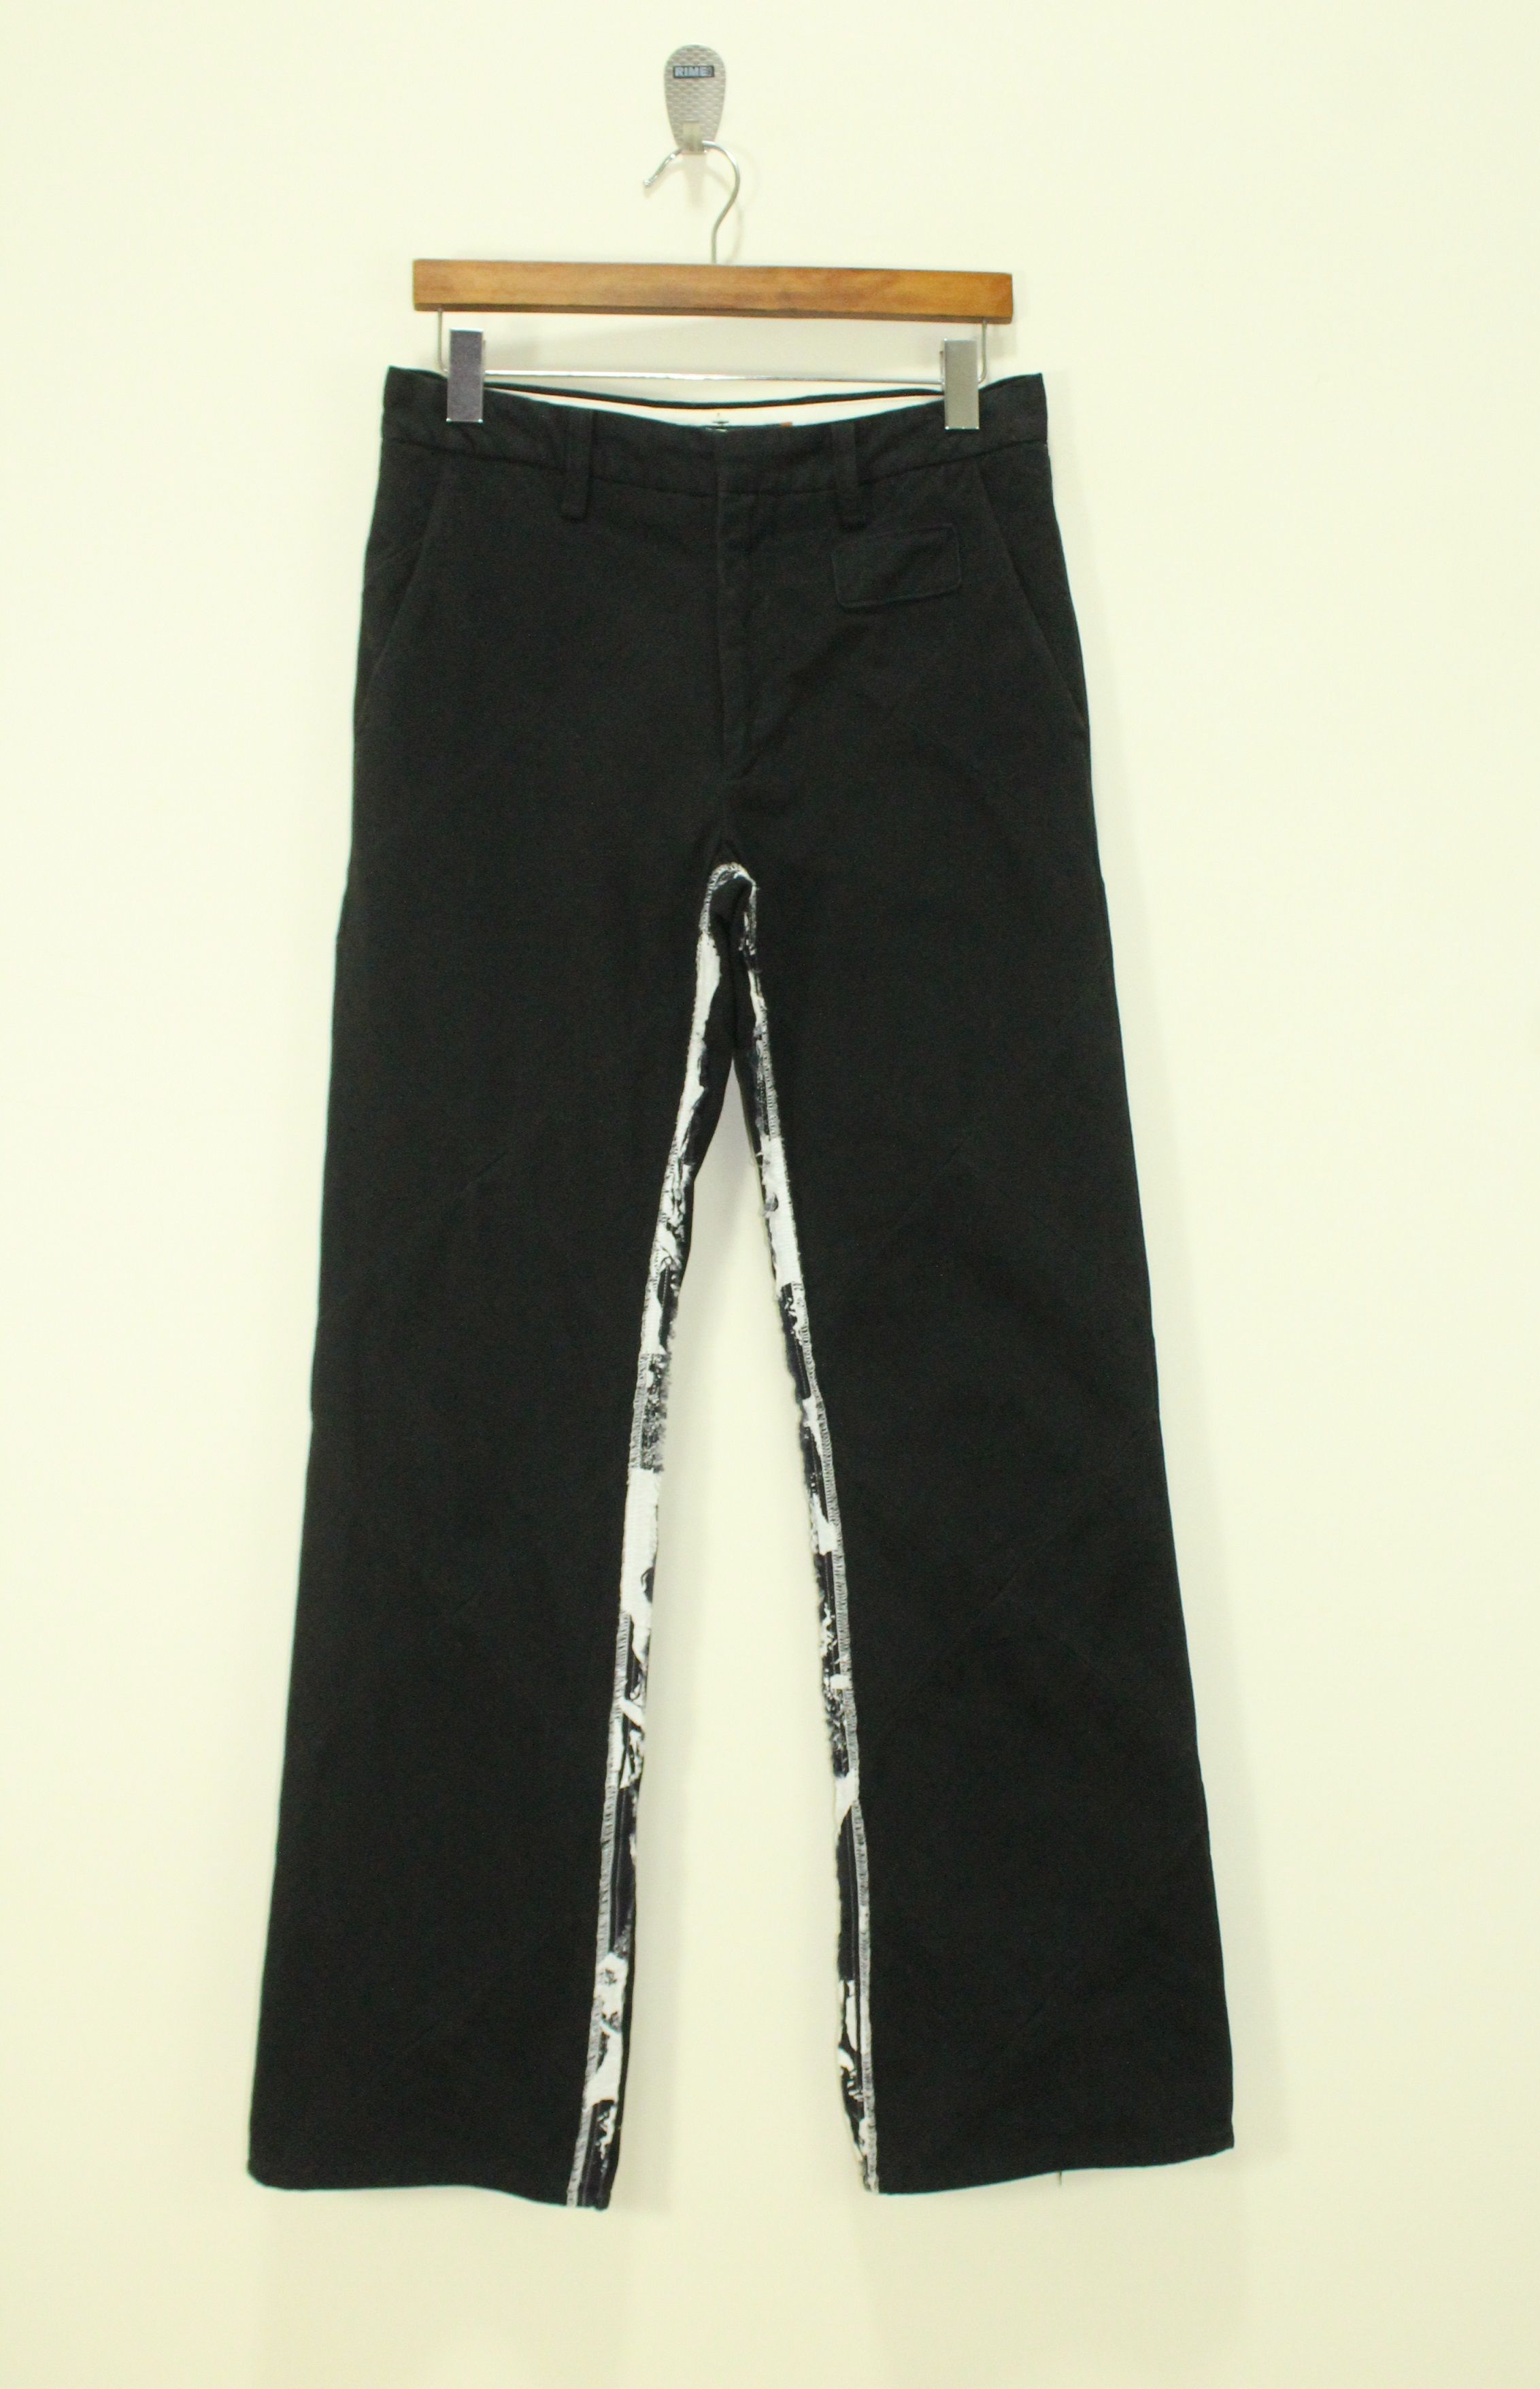 Pre-owned Jun Takahashi X Undercover Pants Patchwork Undercoverism For Rebels In Black